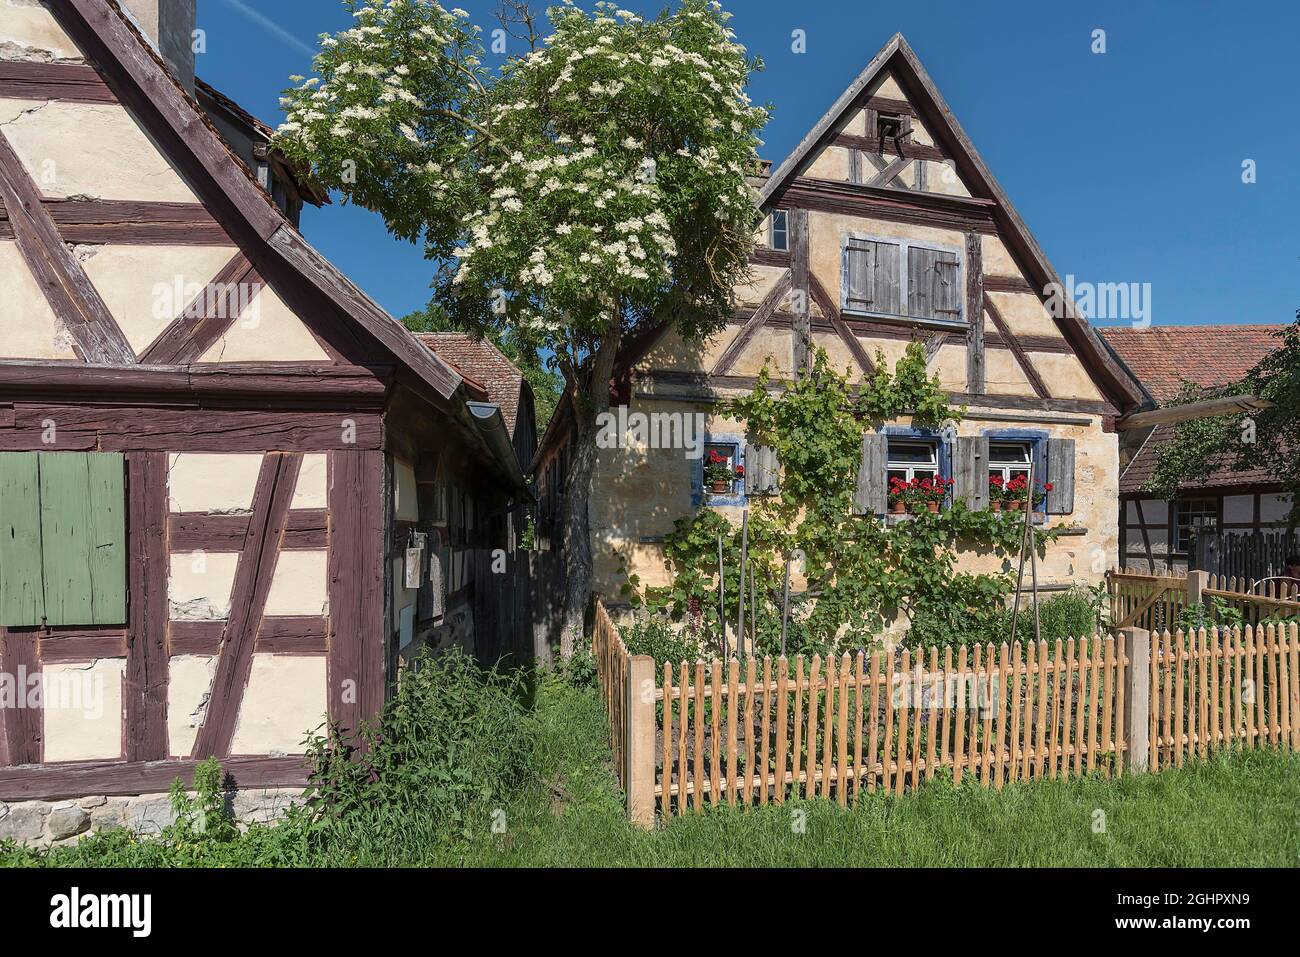 Haeckerhaus/winemaker's house, built in 1706, Franconian Open Air Museum, Bad Windsheim, Middle Franconia, Bavaria, Germany Stock Photo